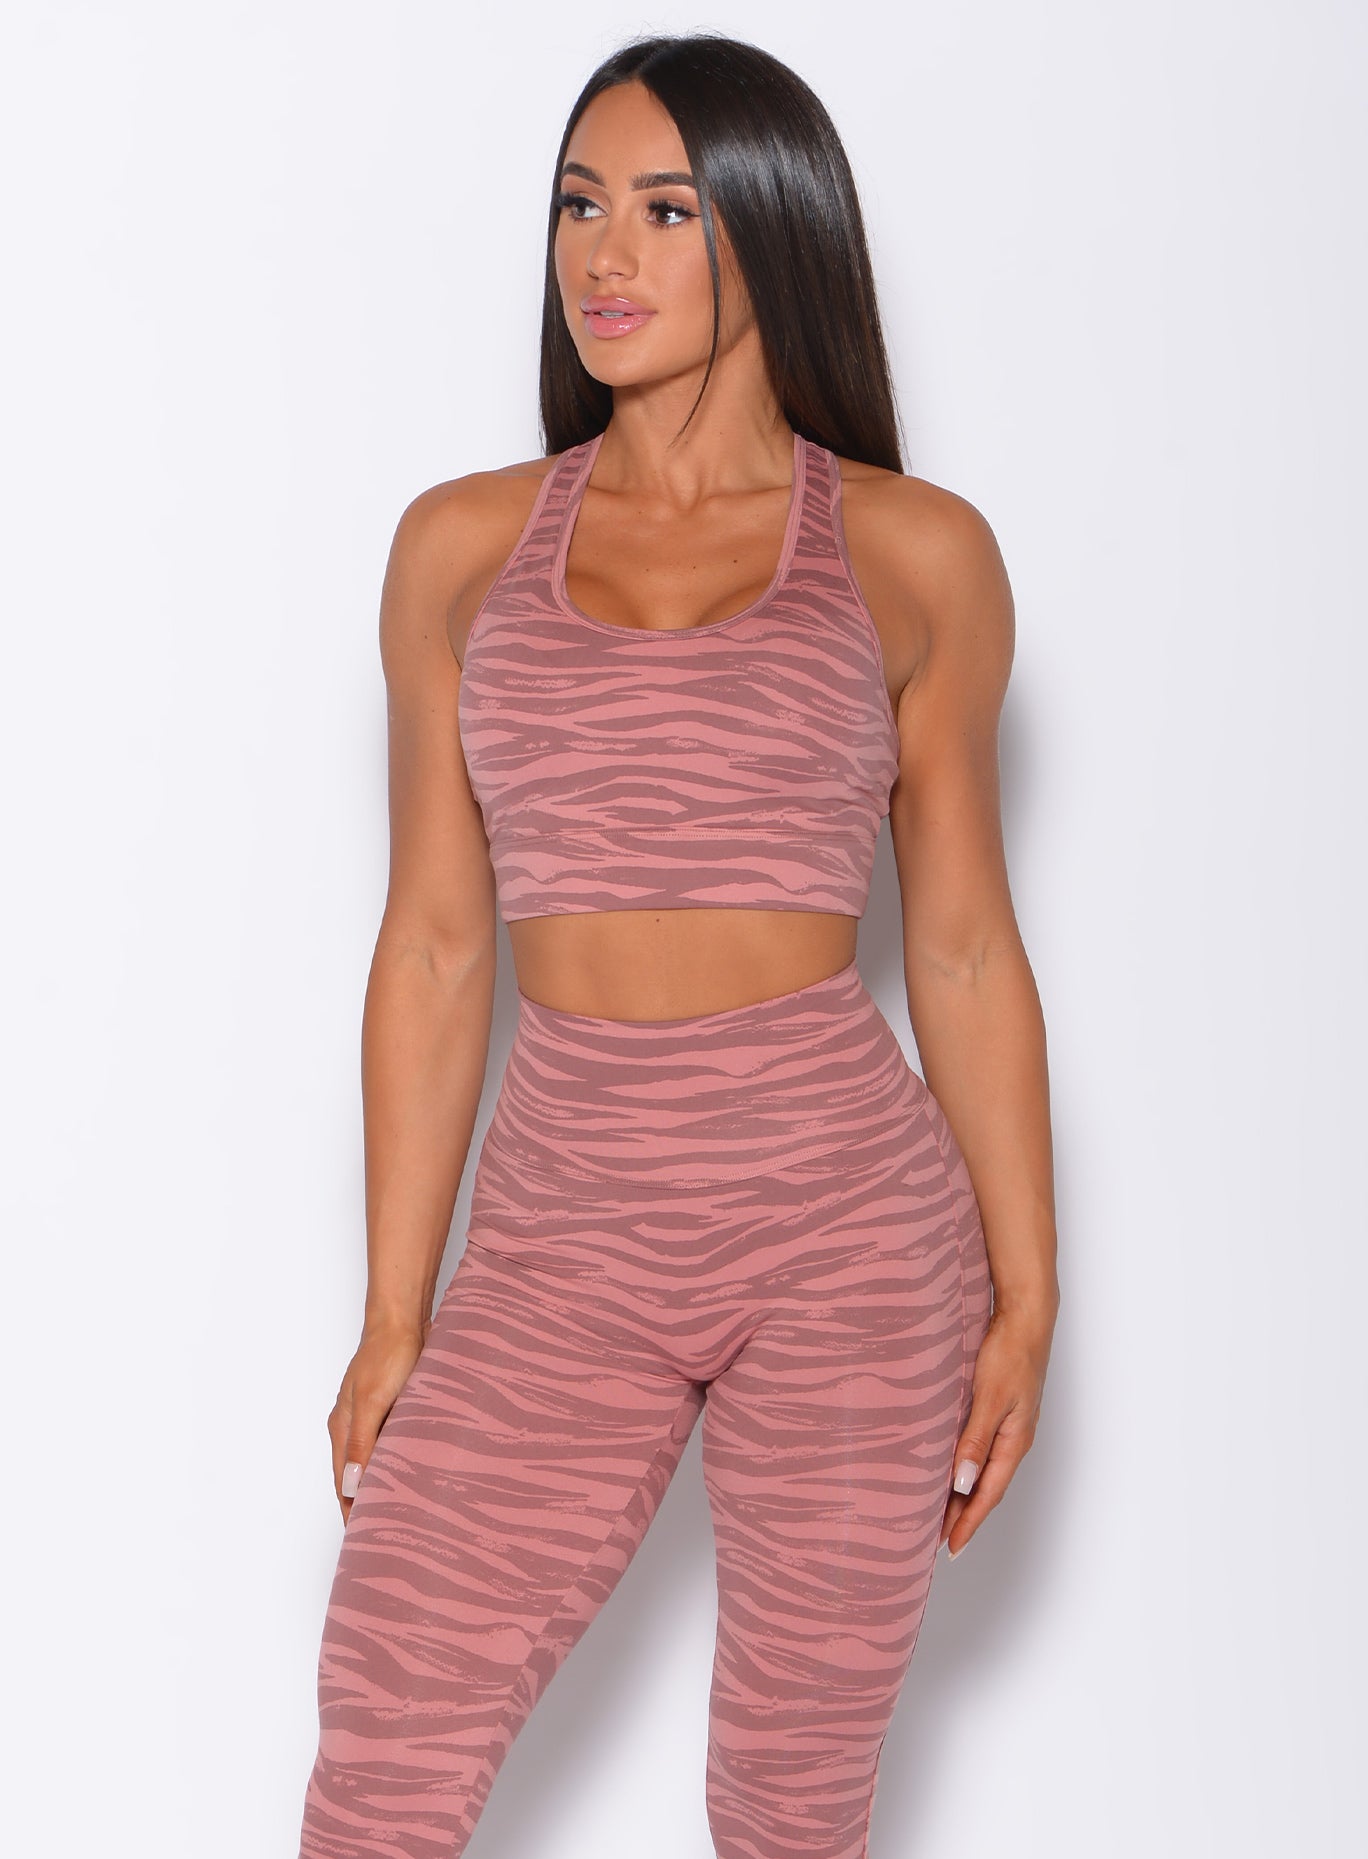 Front profile picture of a model wearing our rival sports bra in nude blush color and a matching sexy back leggings in tiger print